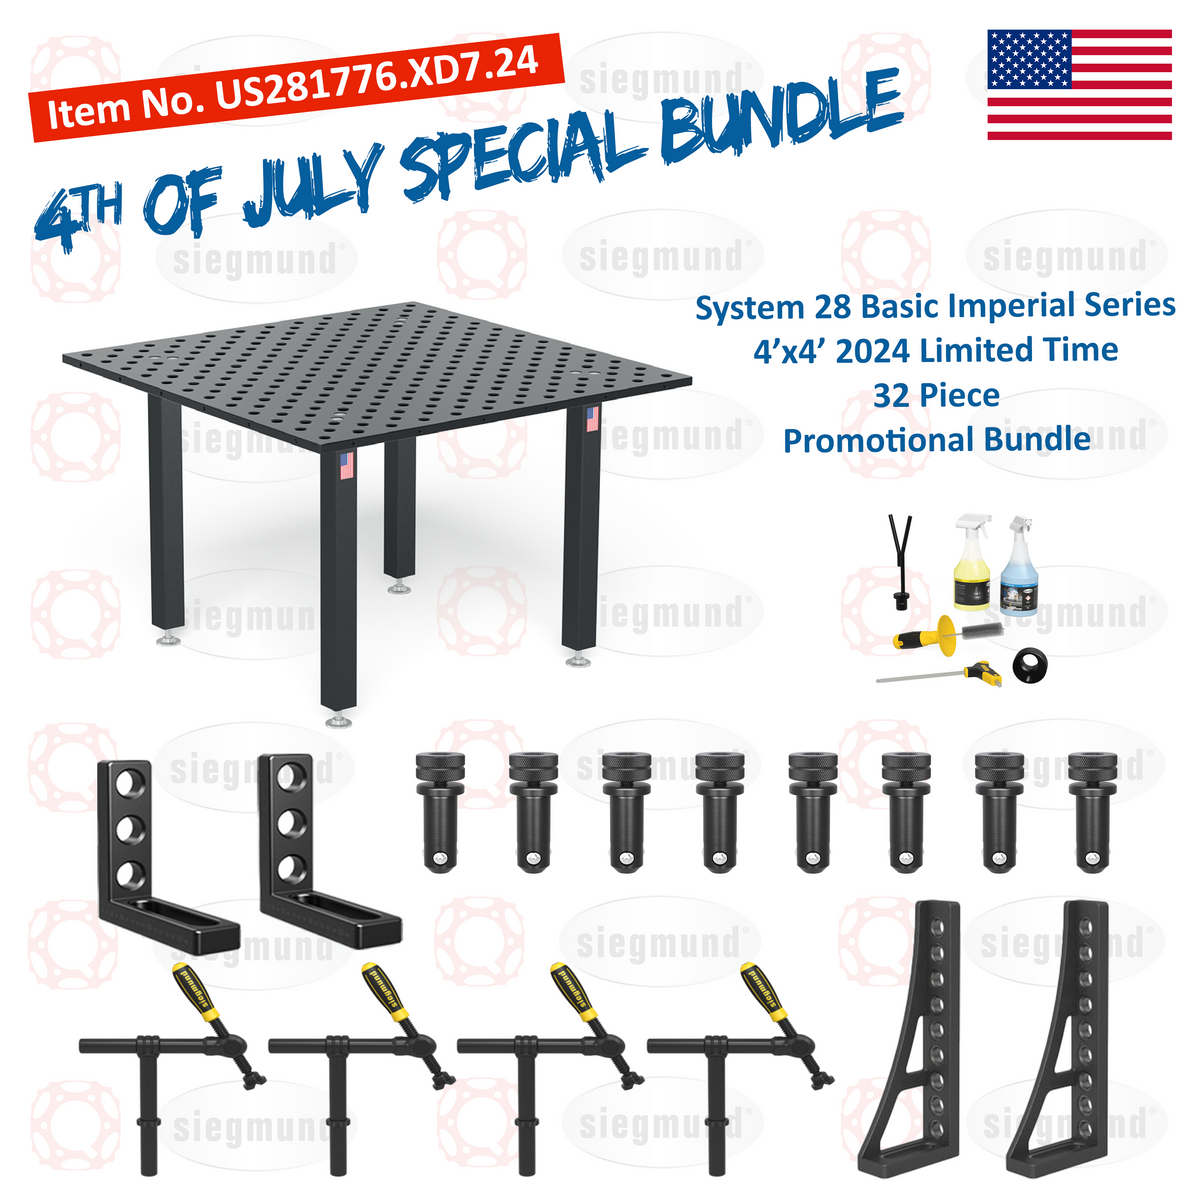 US281776.XD7.24: System 28 4'x4' (48"x48") Imperial "BASIC" Series (Inch) Welding Table 23 Piece Bundle (JULY 4TH, 2024 SPECIAL PROMOTION)